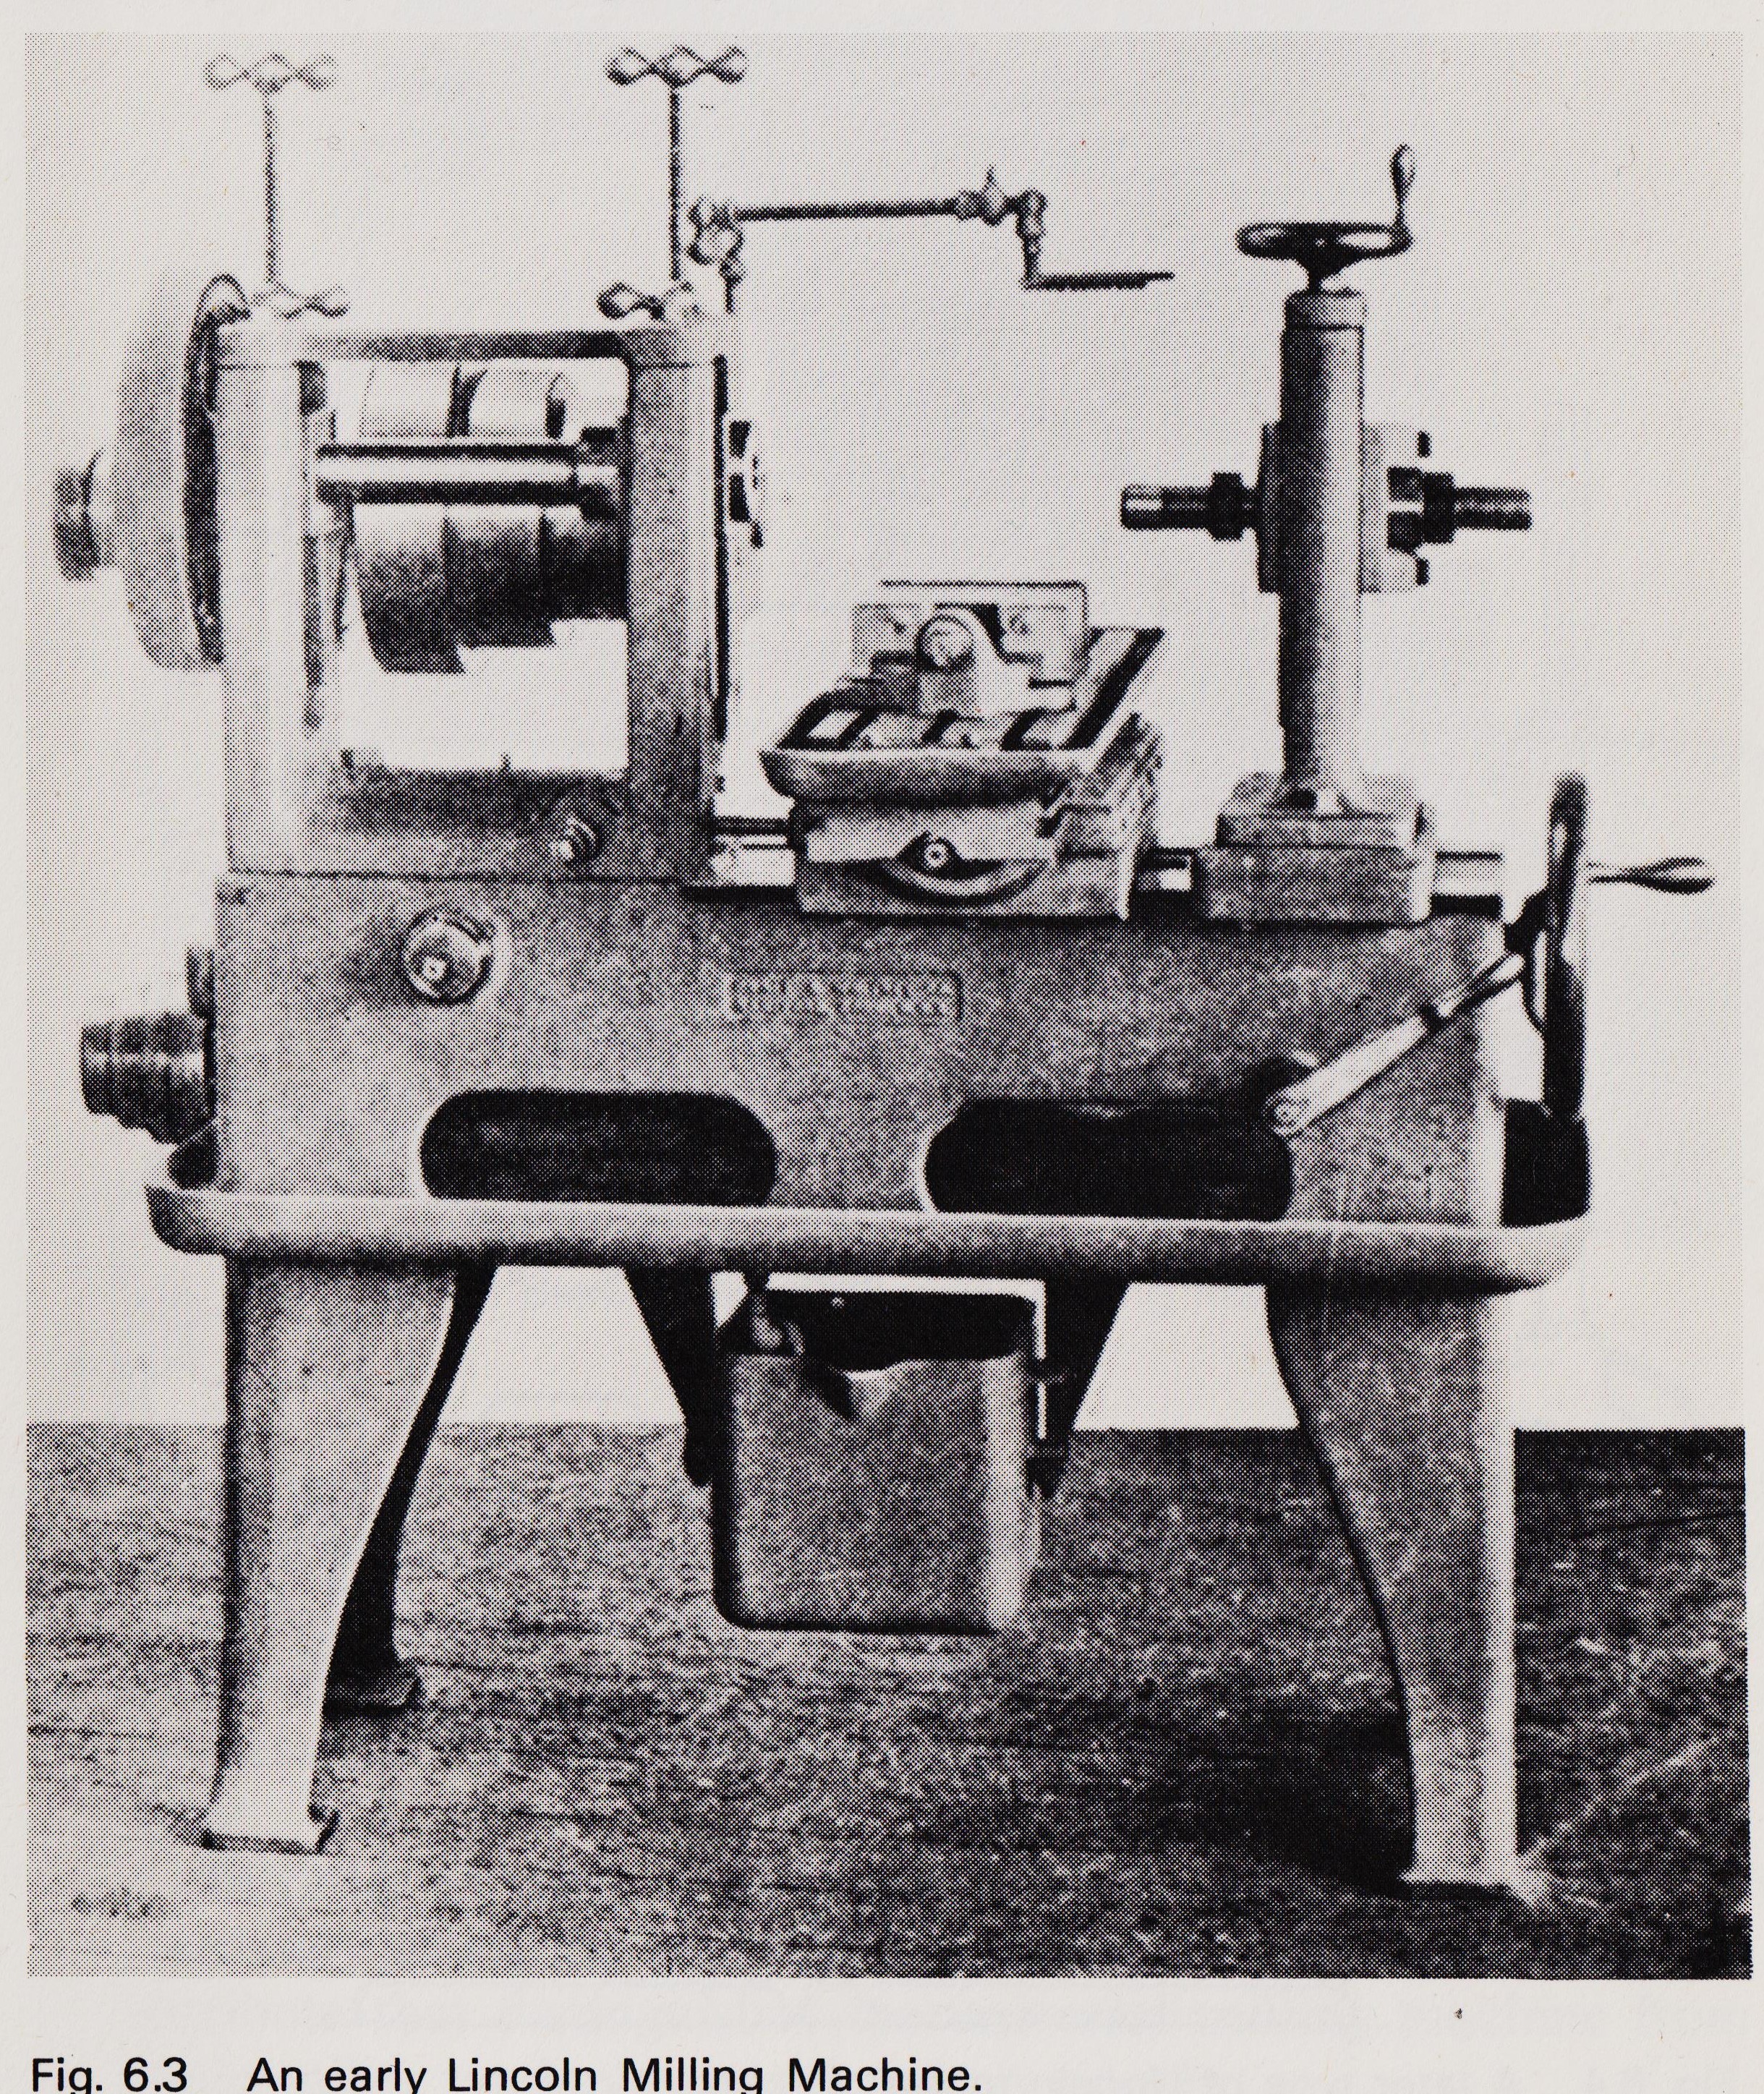 https://antiquemachinery.com/images-Milling-Machine/History-Machine-Tools-Book-67-68-Lincoln-Mill-1890s.jpeg